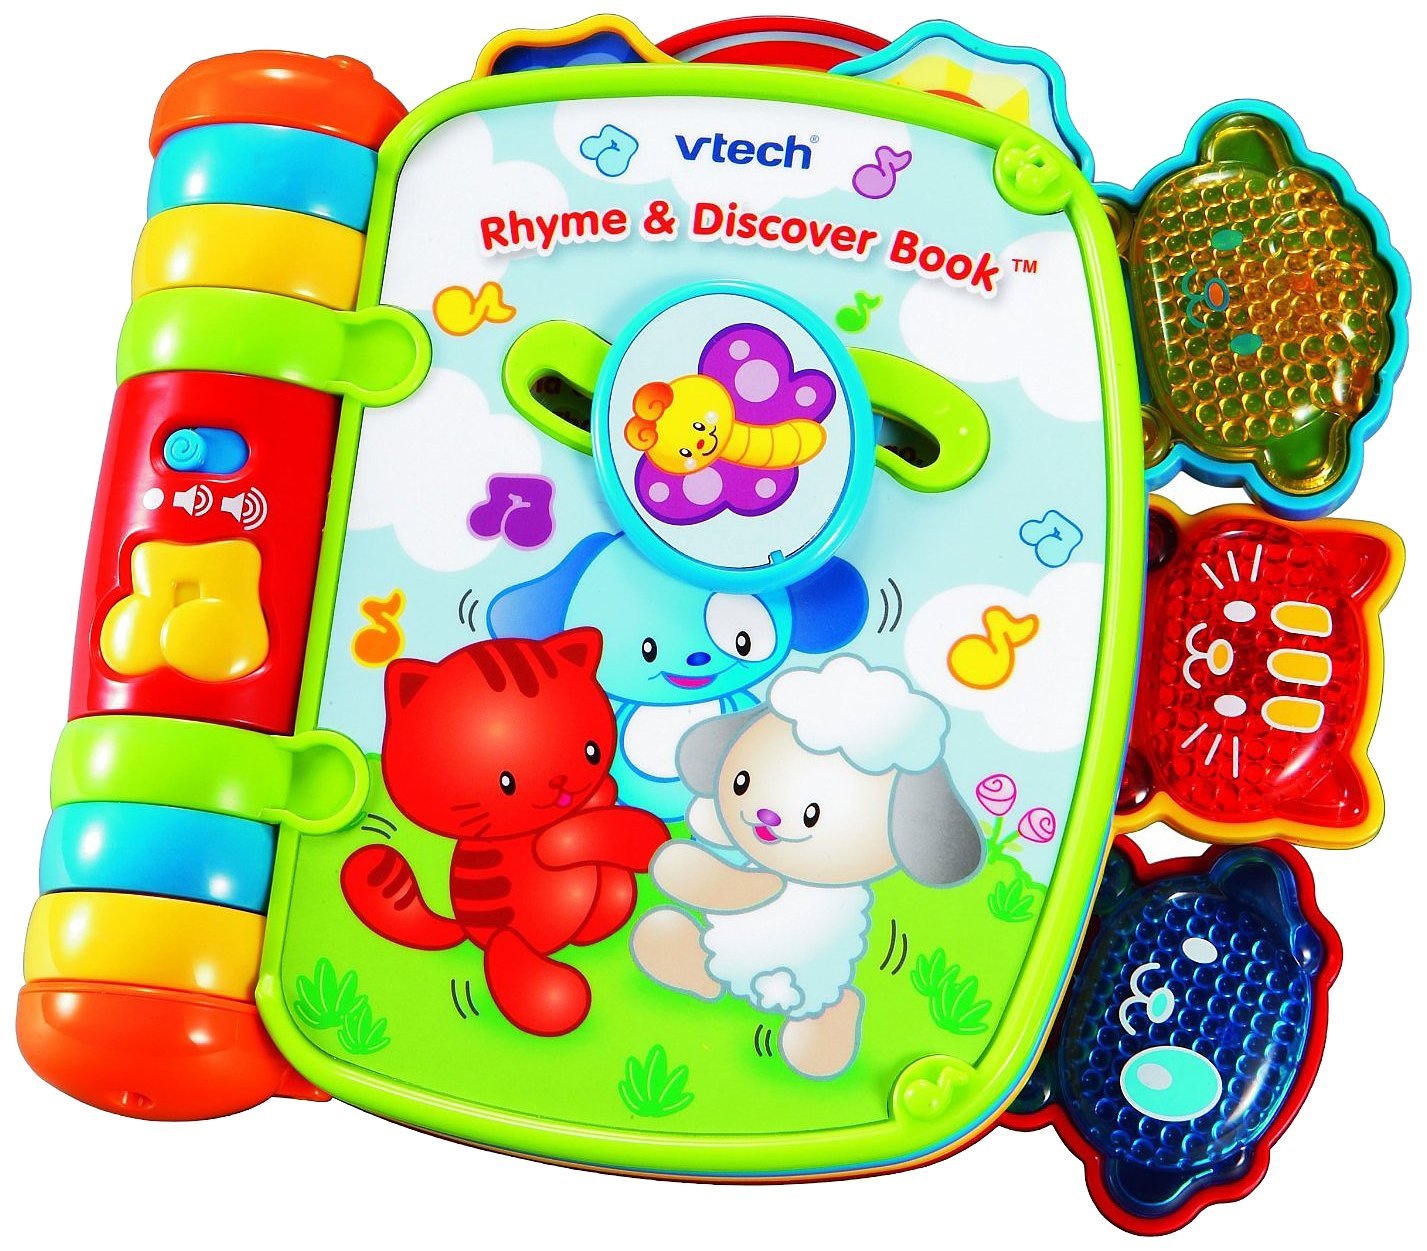 Rhyme & Discover Book Only $7.49 (Reg. $14.99)